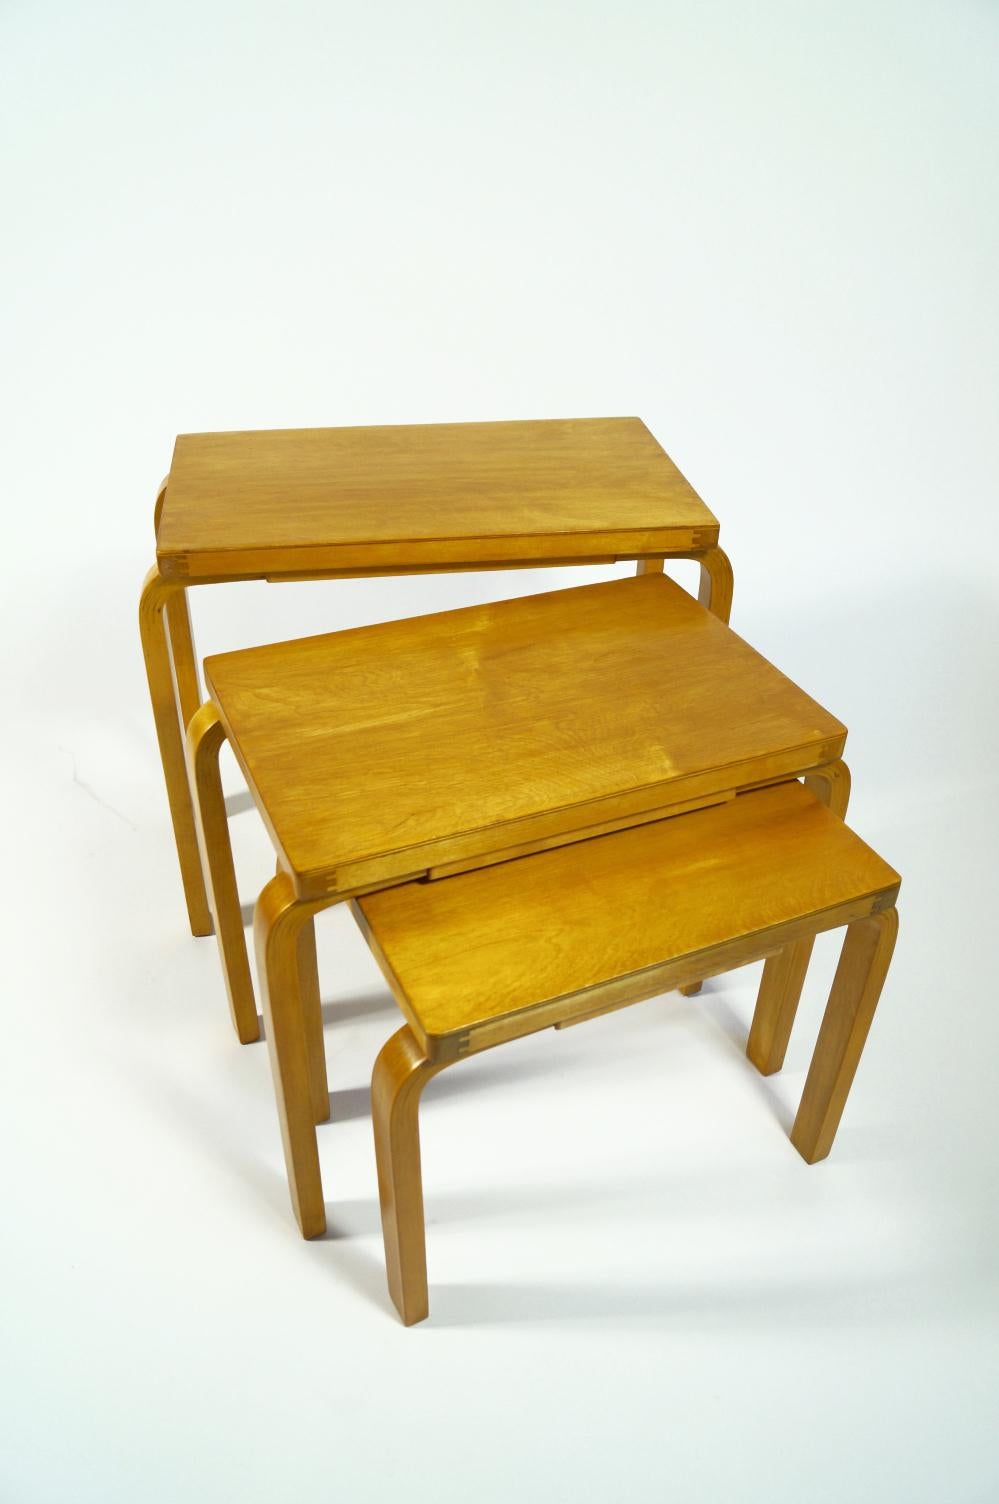 This beautiful and rare trio of nesting tables by Alvar Aalto can serve as side tables, coffee tables, or be used singularly, spread across a room to provide multiple table surfaces. These tables are in original condition and they have gorgeous